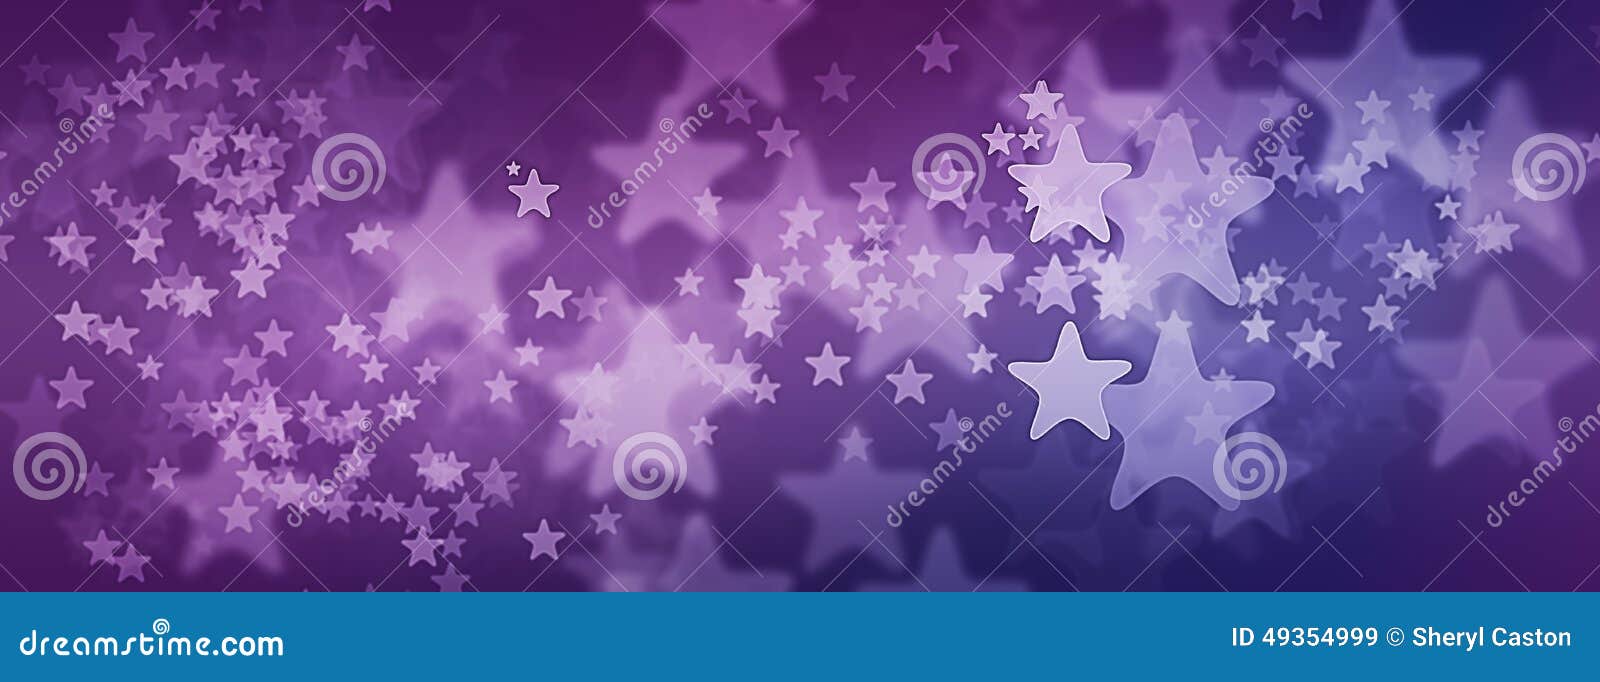 Purple Starry Background for Facebook Cover Photo Stock Illustration -  Illustration of cool, holiday: 49354999